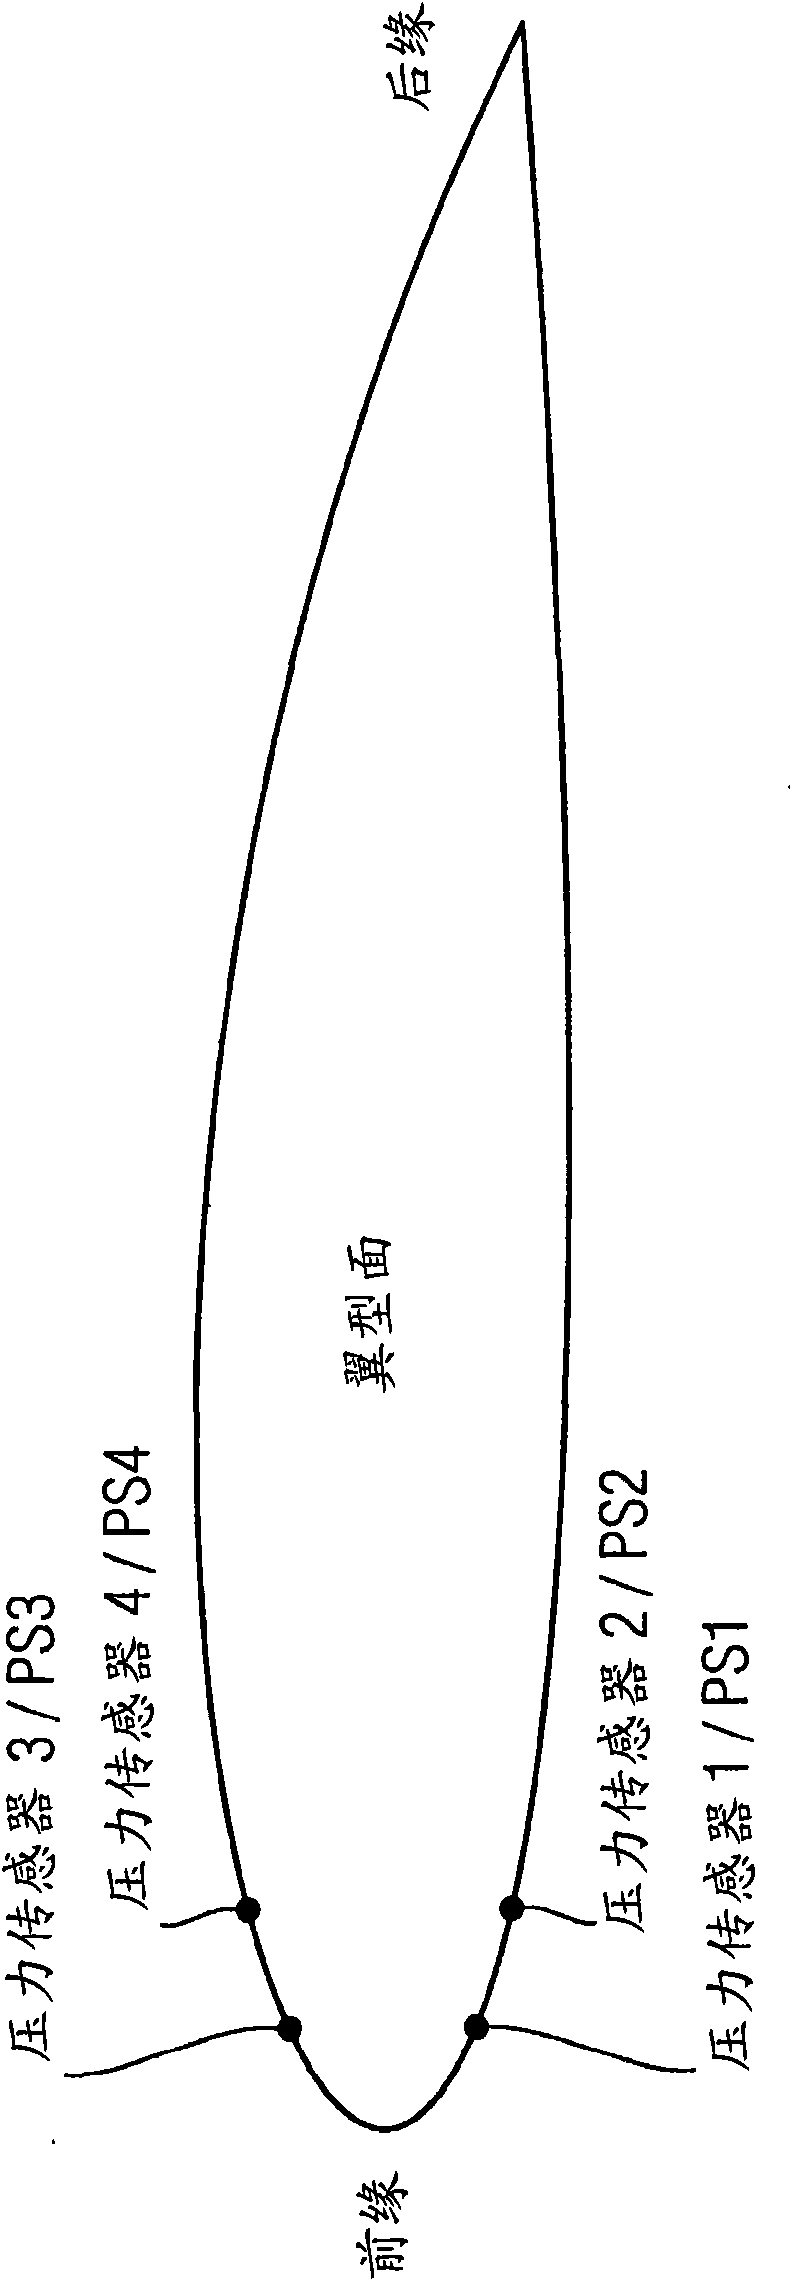 Method and arrangement to adjust the pitch of wind turbine blades